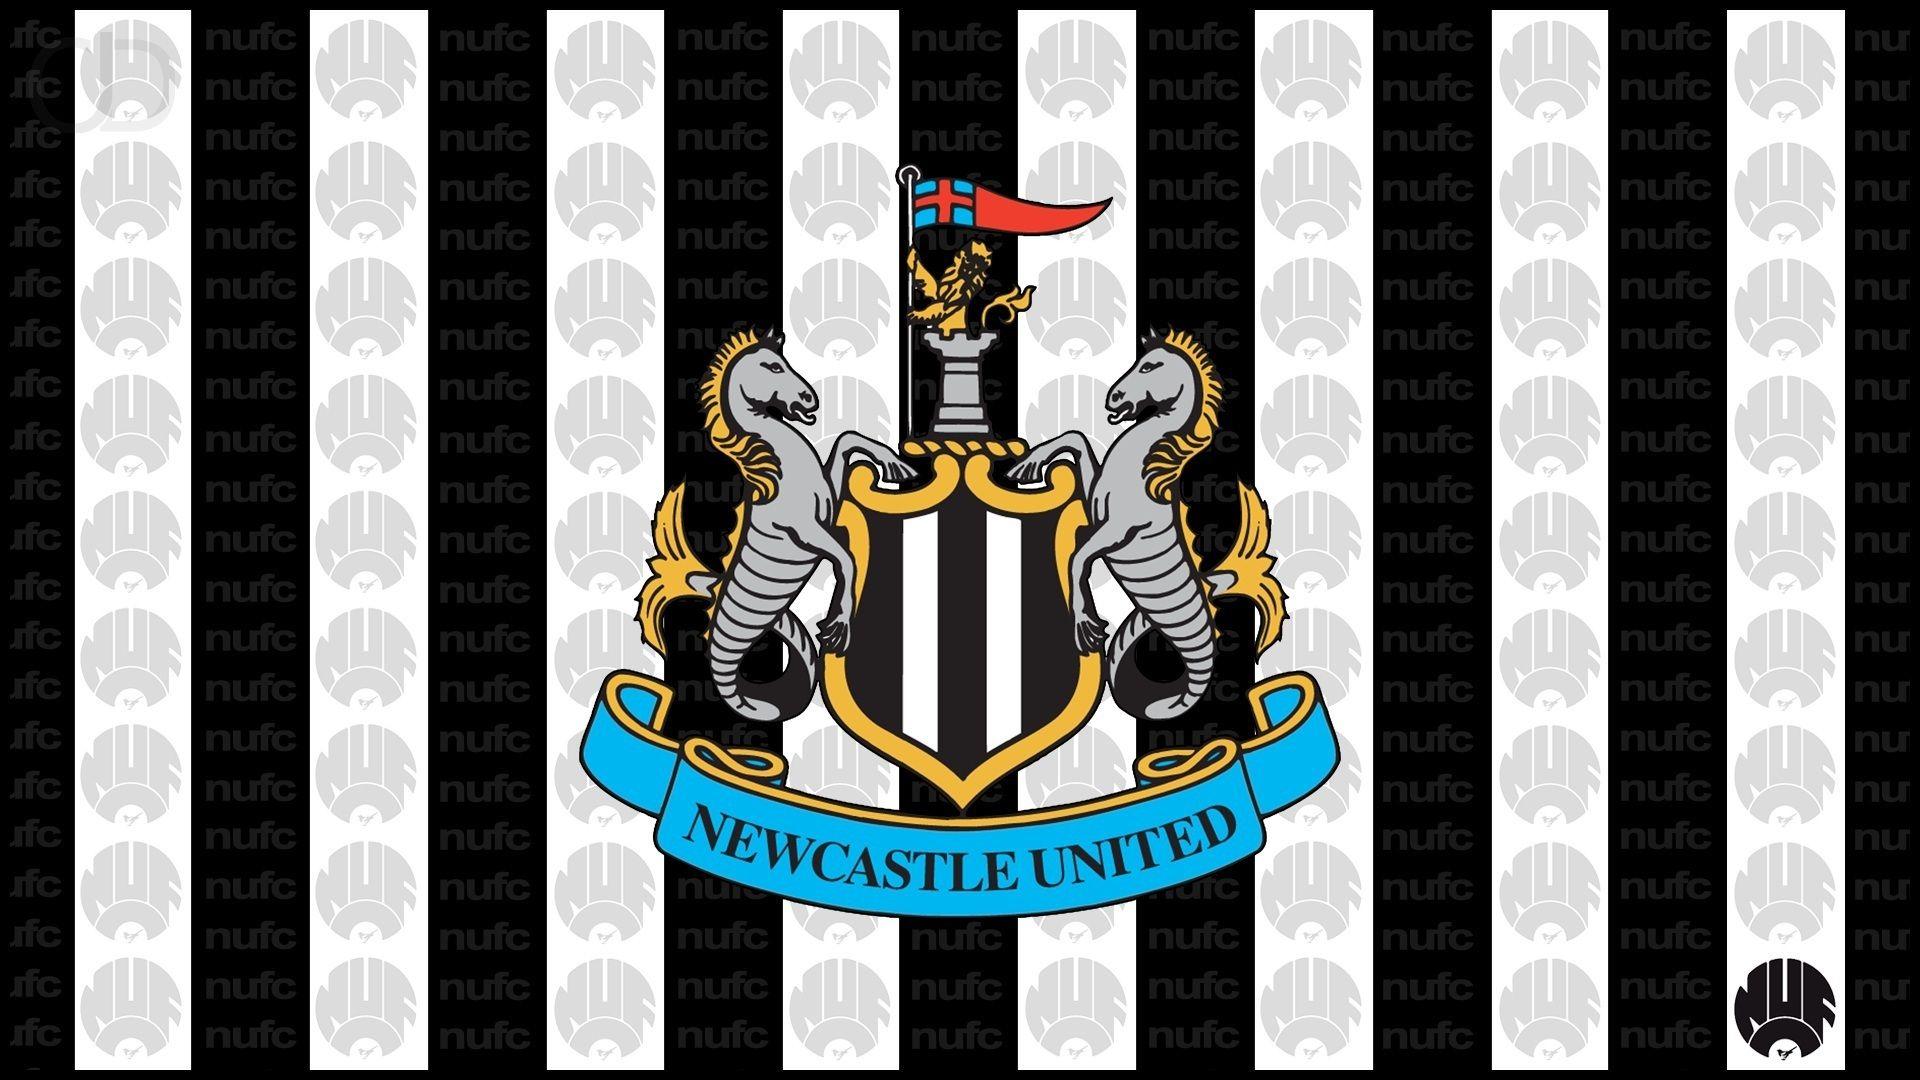 NUFC Logo - Newcastle United Wallpapers - Wallpaper Cave